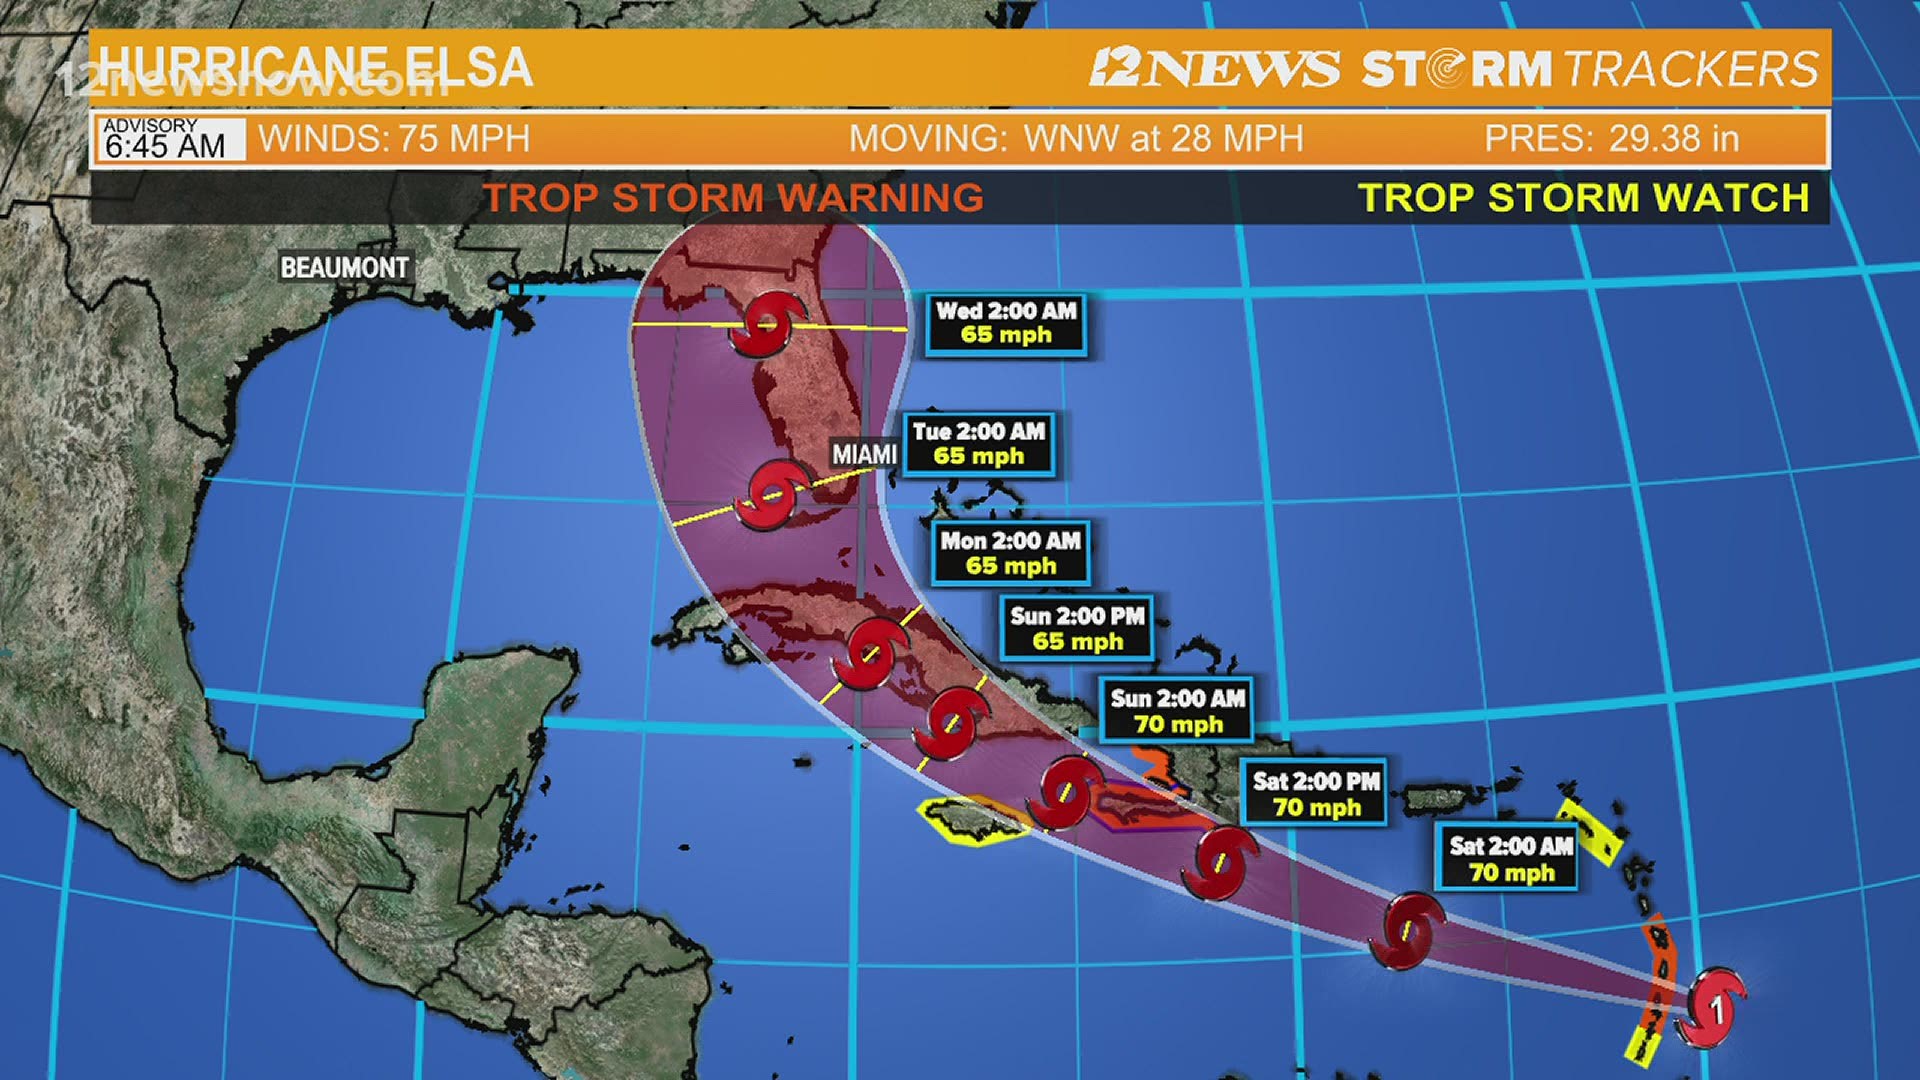 The hurricane is not expected to be a problem for Texas, but Florida is watching the forecast path closely.